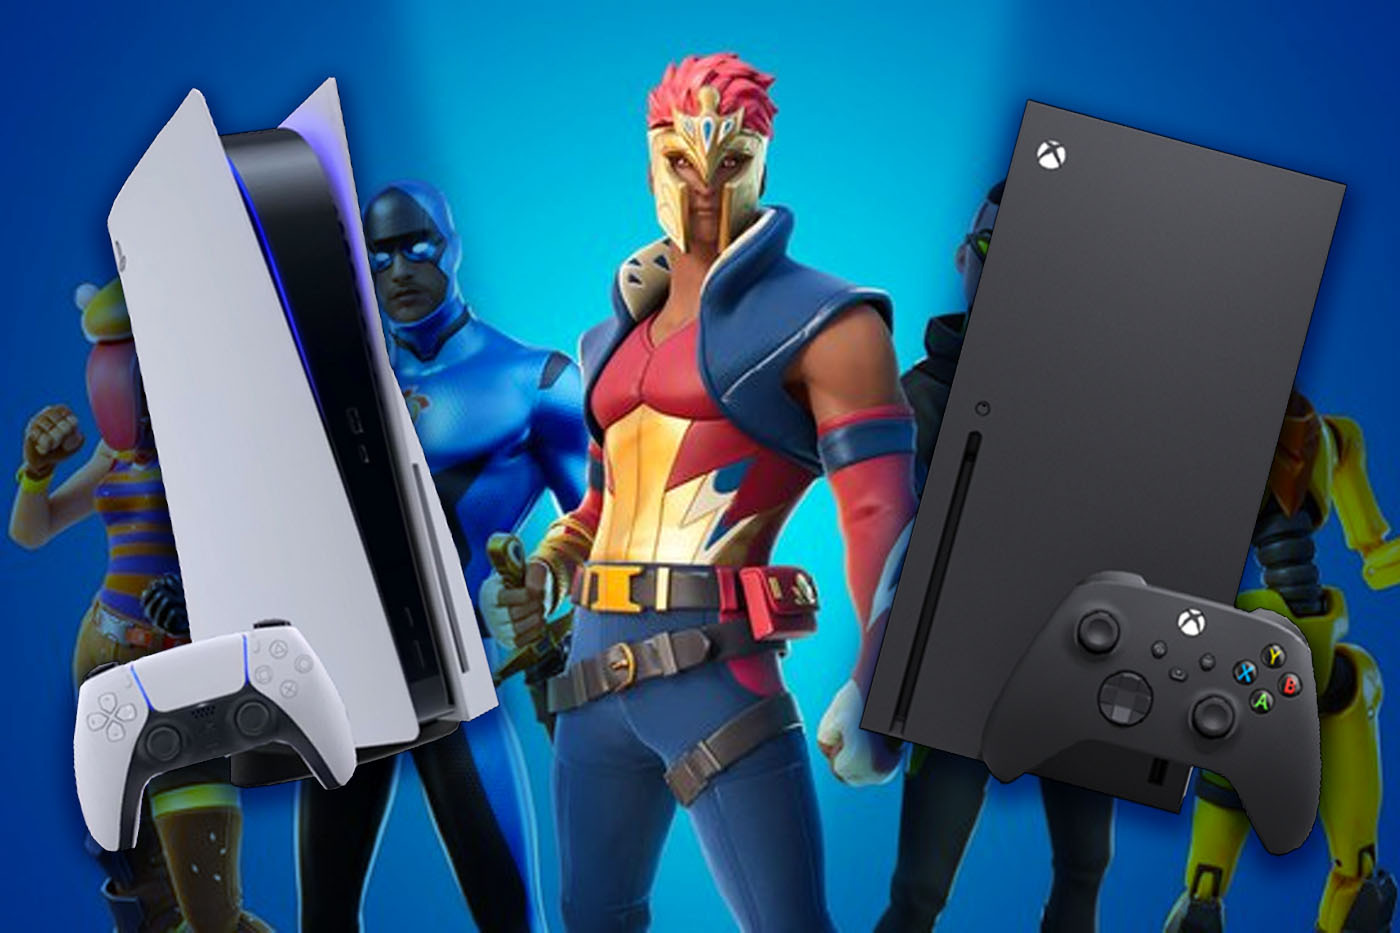 can you play fortnite on a ps5